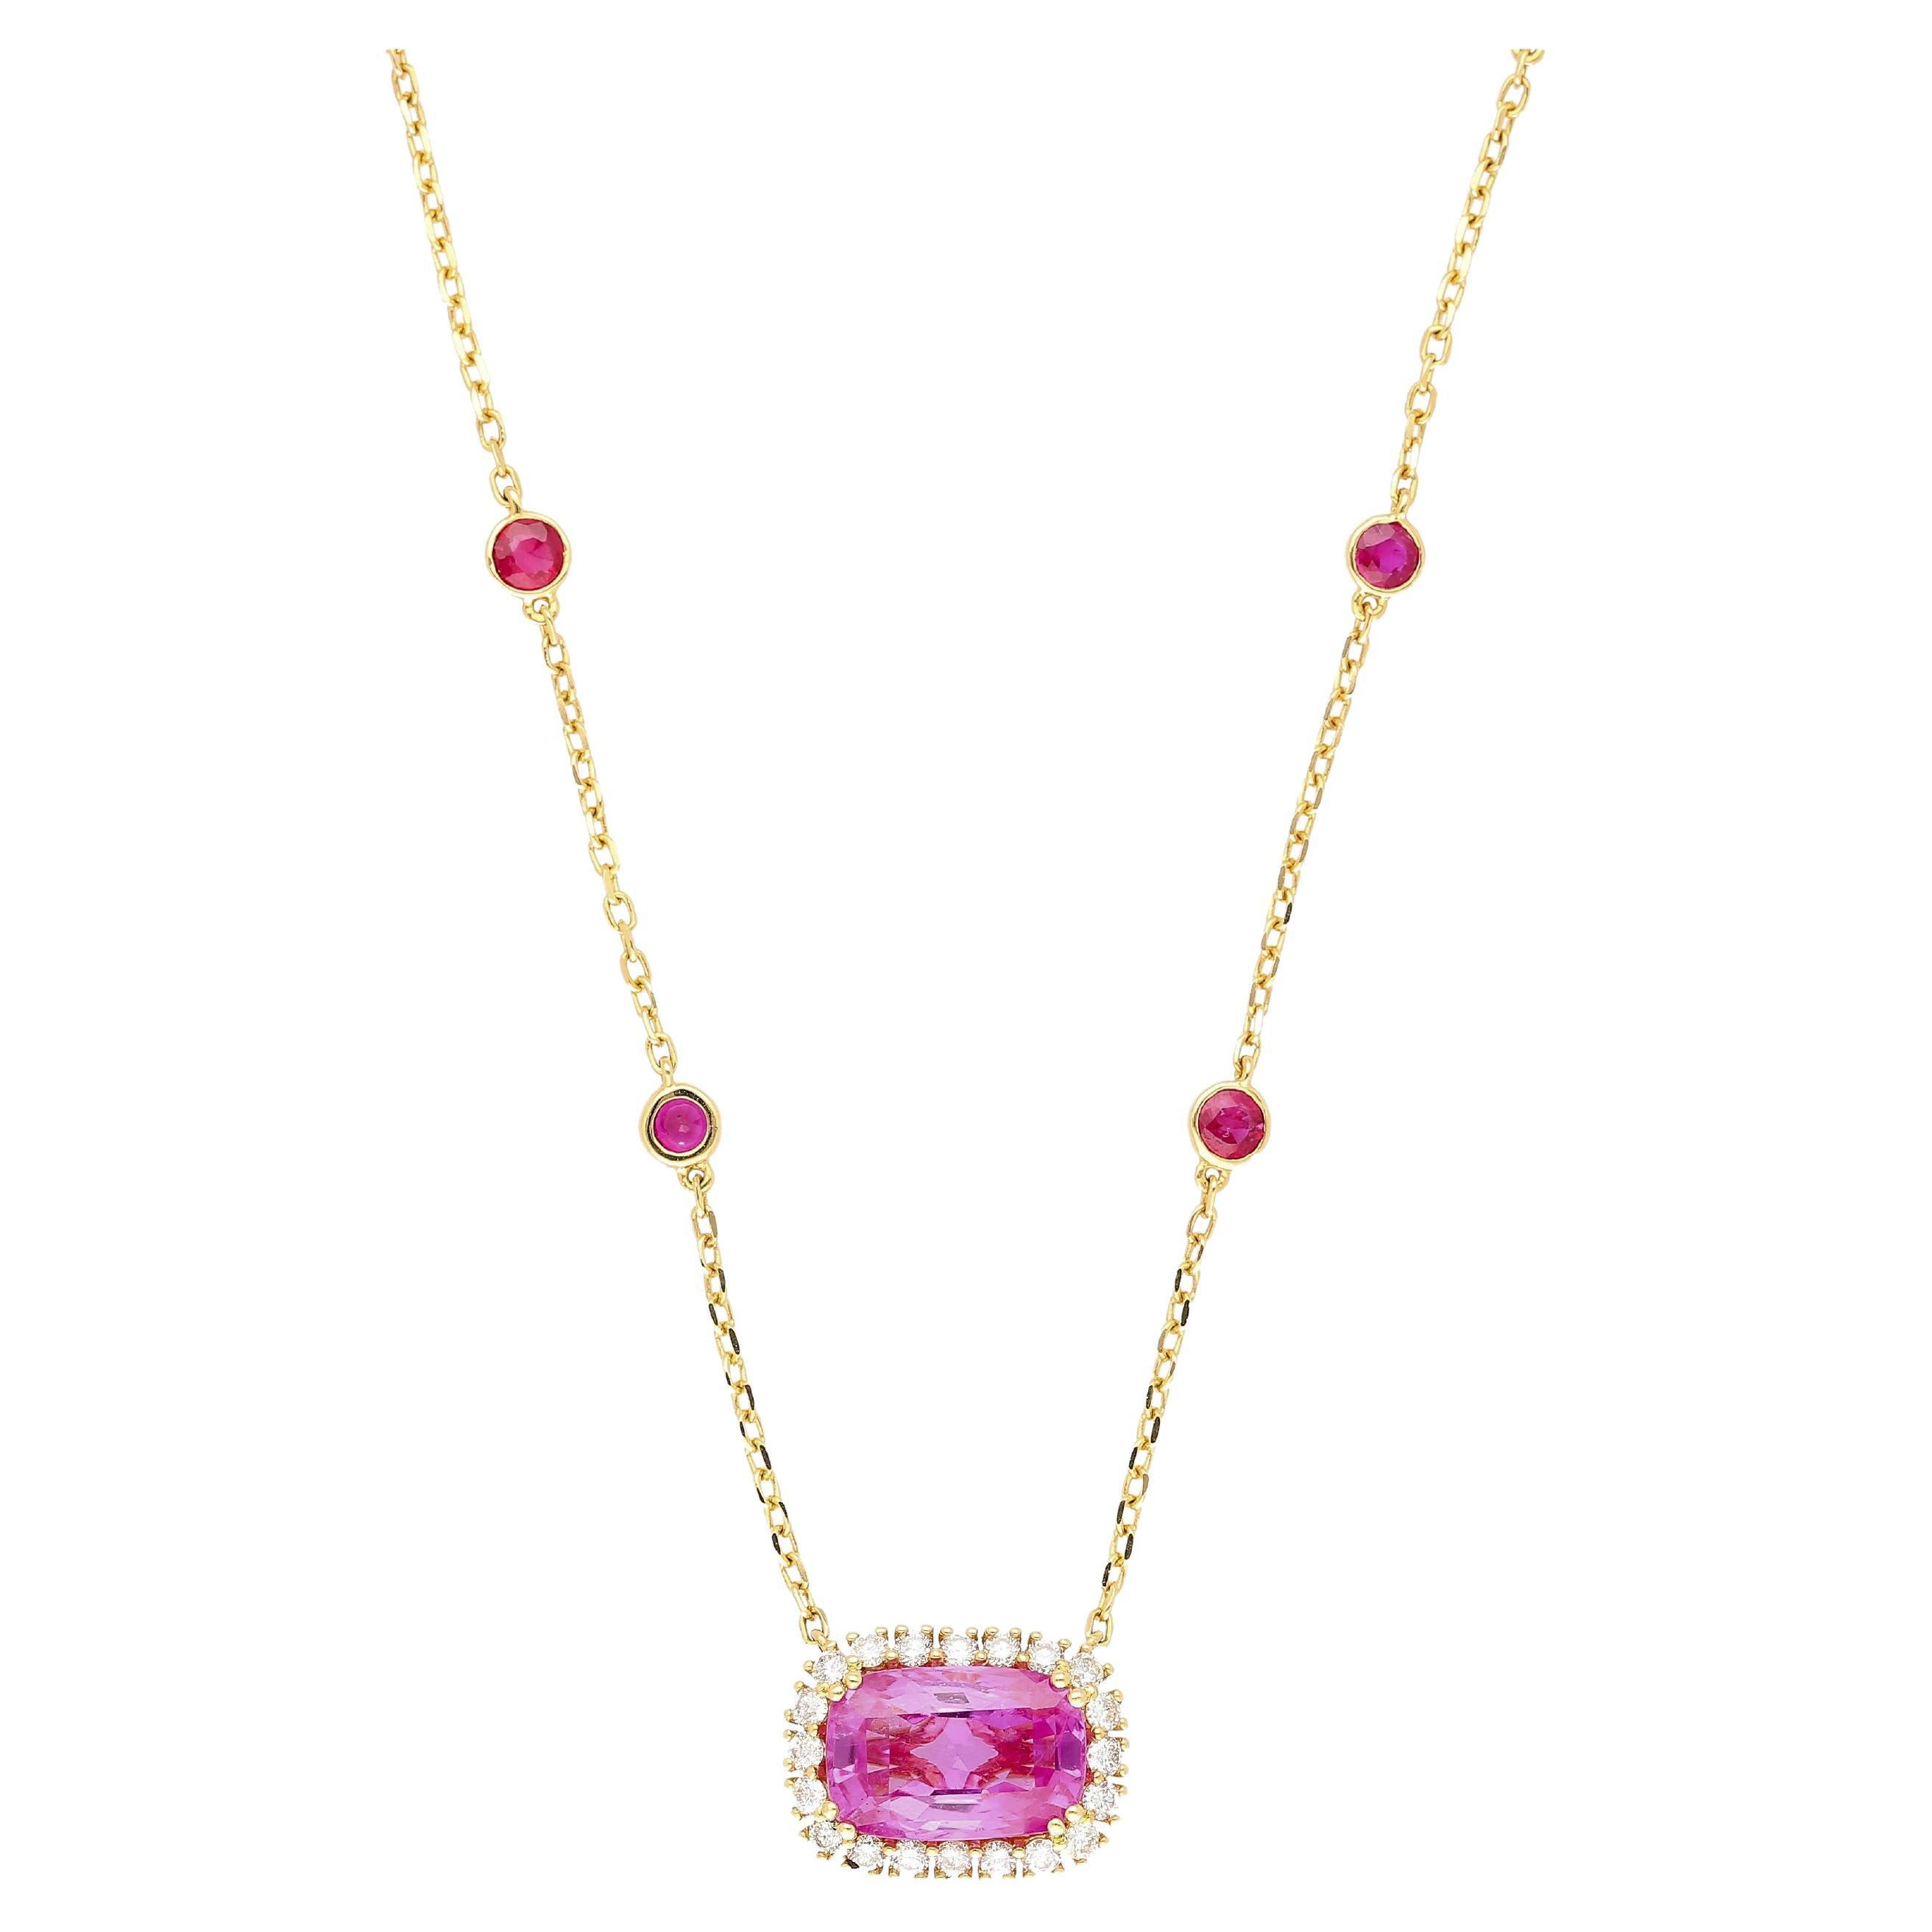 5.10 Carat No Heat Ceylon Pink Sapphire East West Floating Necklace For Sale